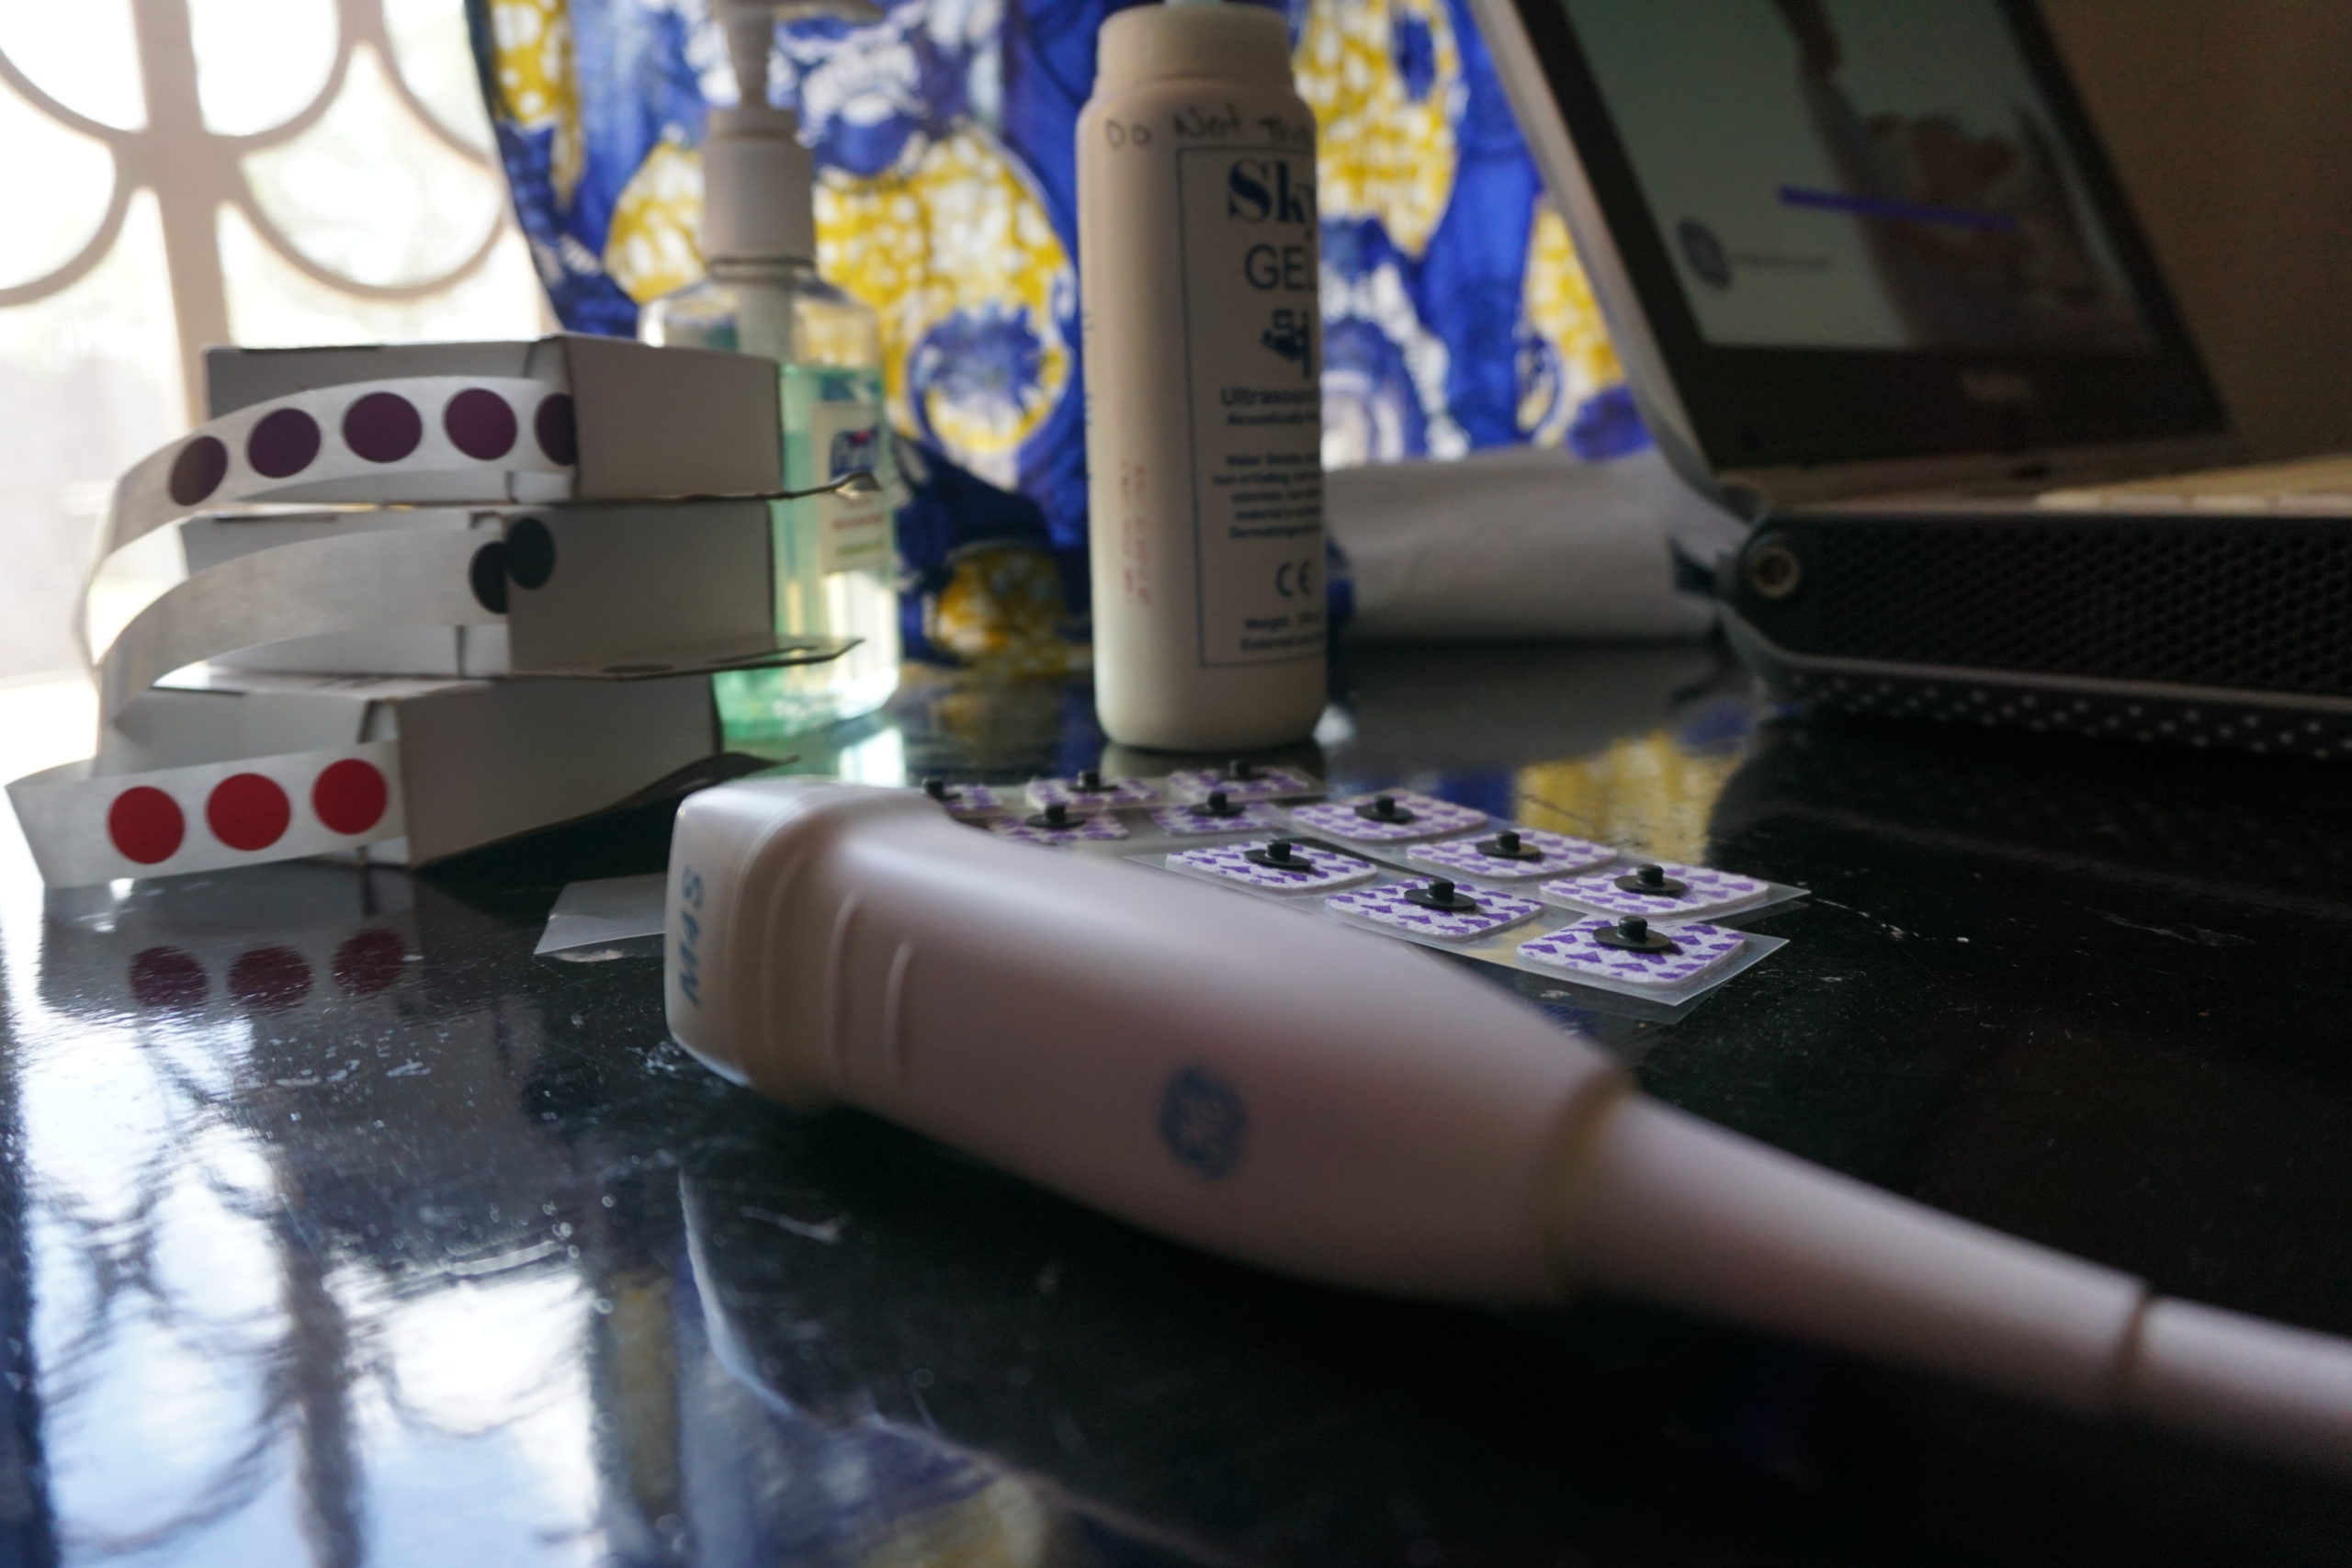 An ultrasound wand, stickers and related supplies rest on a table for later use in the GOAL study.